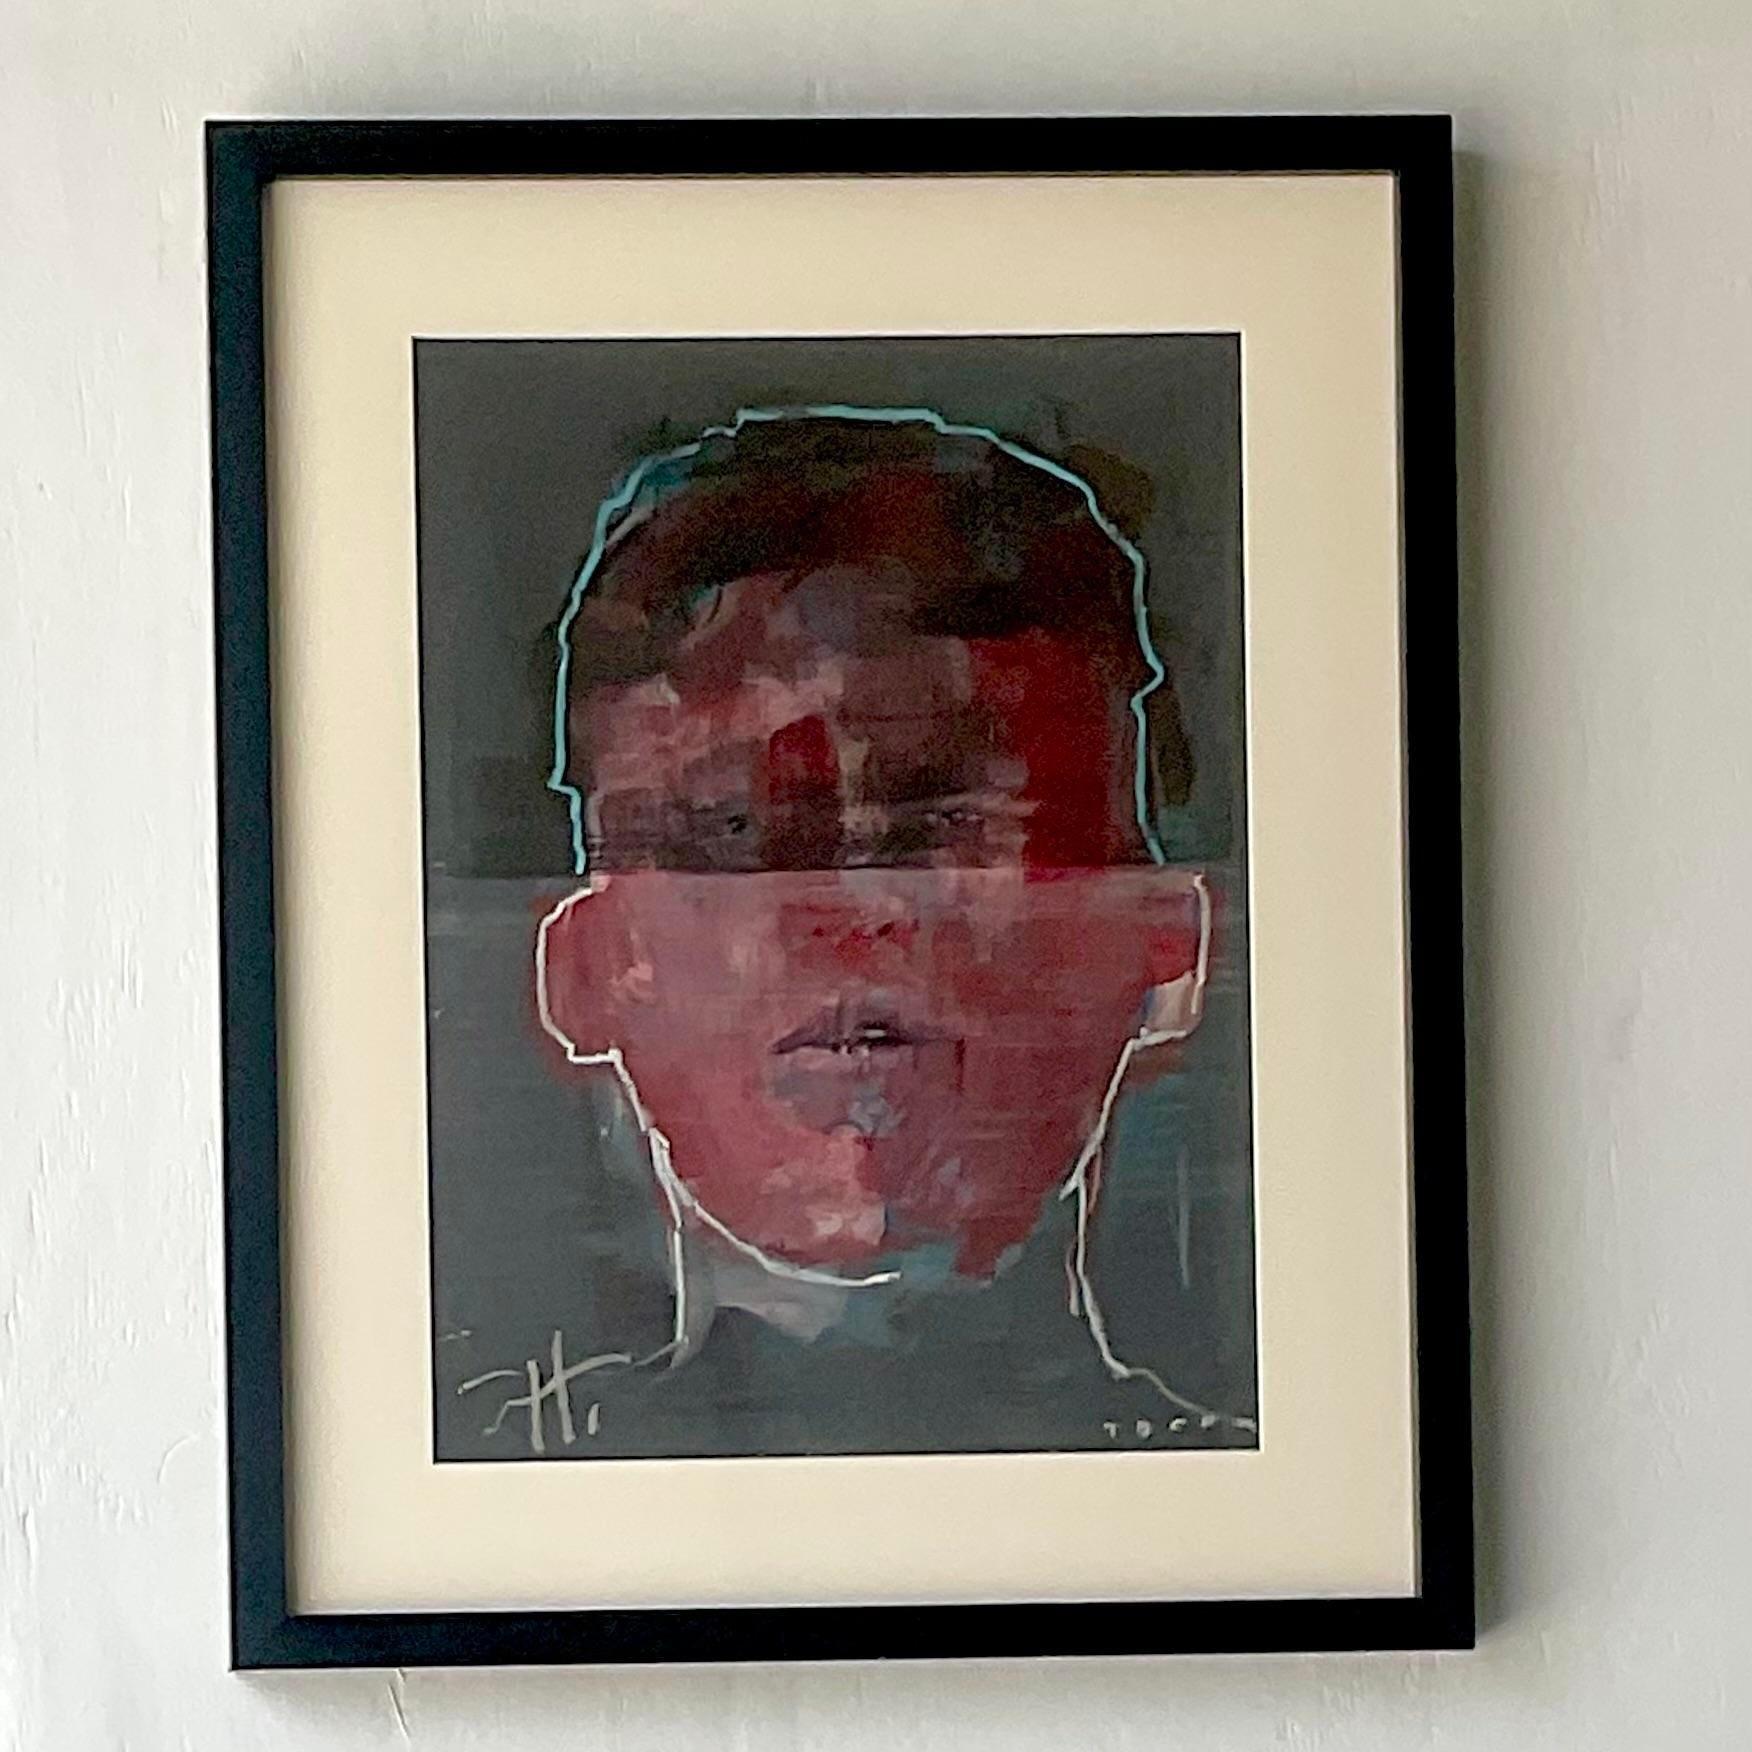 A fabulous vintage Boho original oil portrait. A chic contemporary composition of a young man. Dark and seductive colors. Signed by the British artist. Acquired from a Palm Beach estate. 